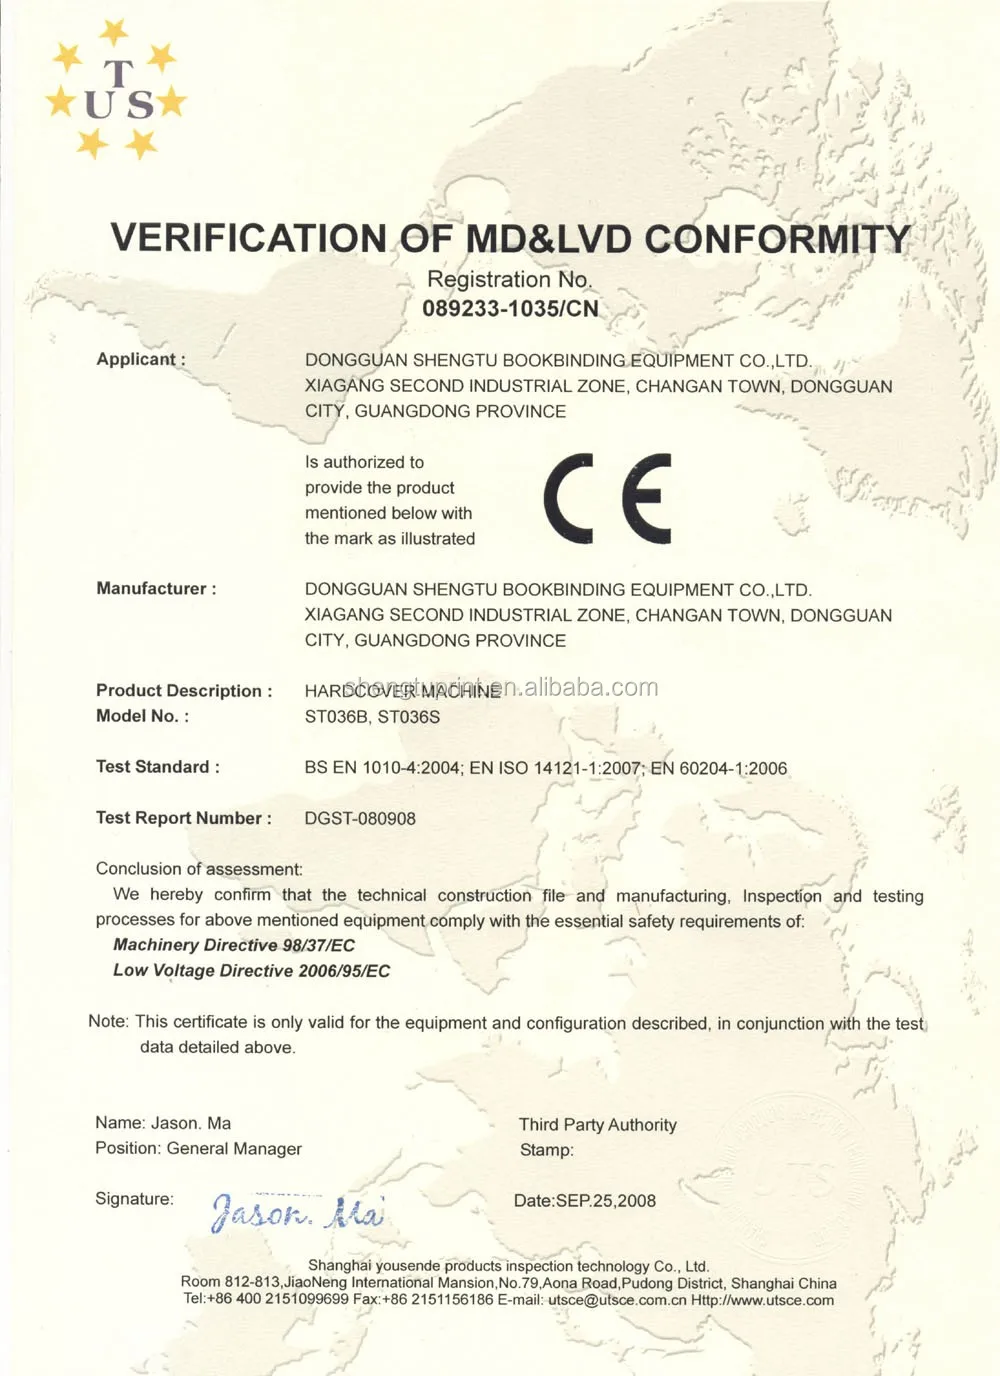 CE certificate for Hardcover Machine